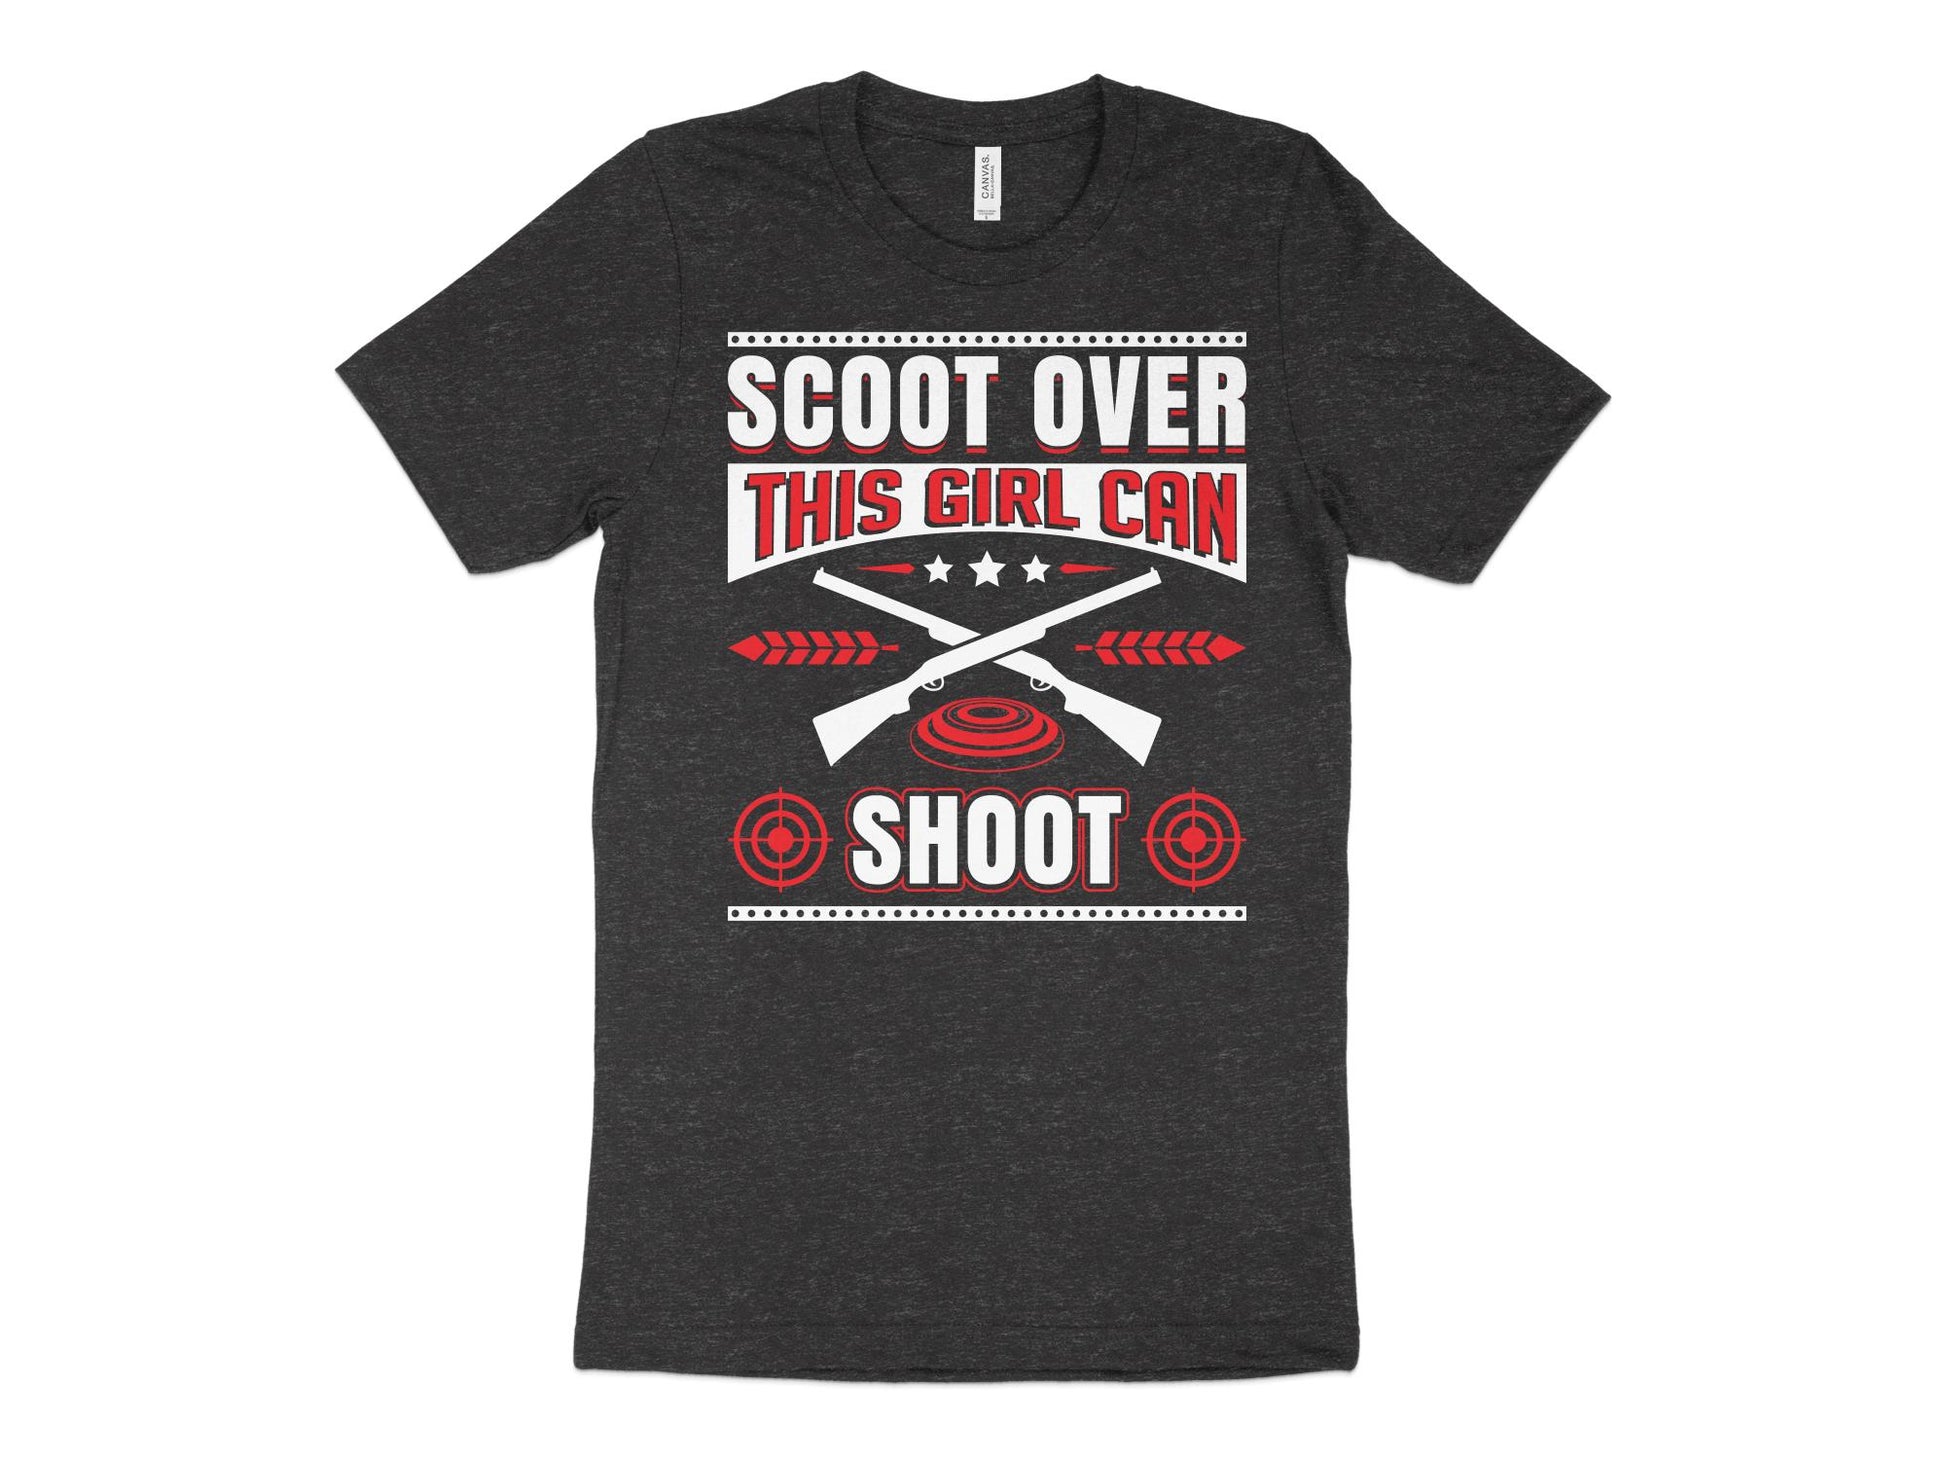 Trap Shooting Shirt - Scoot Over This Girl Can Shoot, charcoal